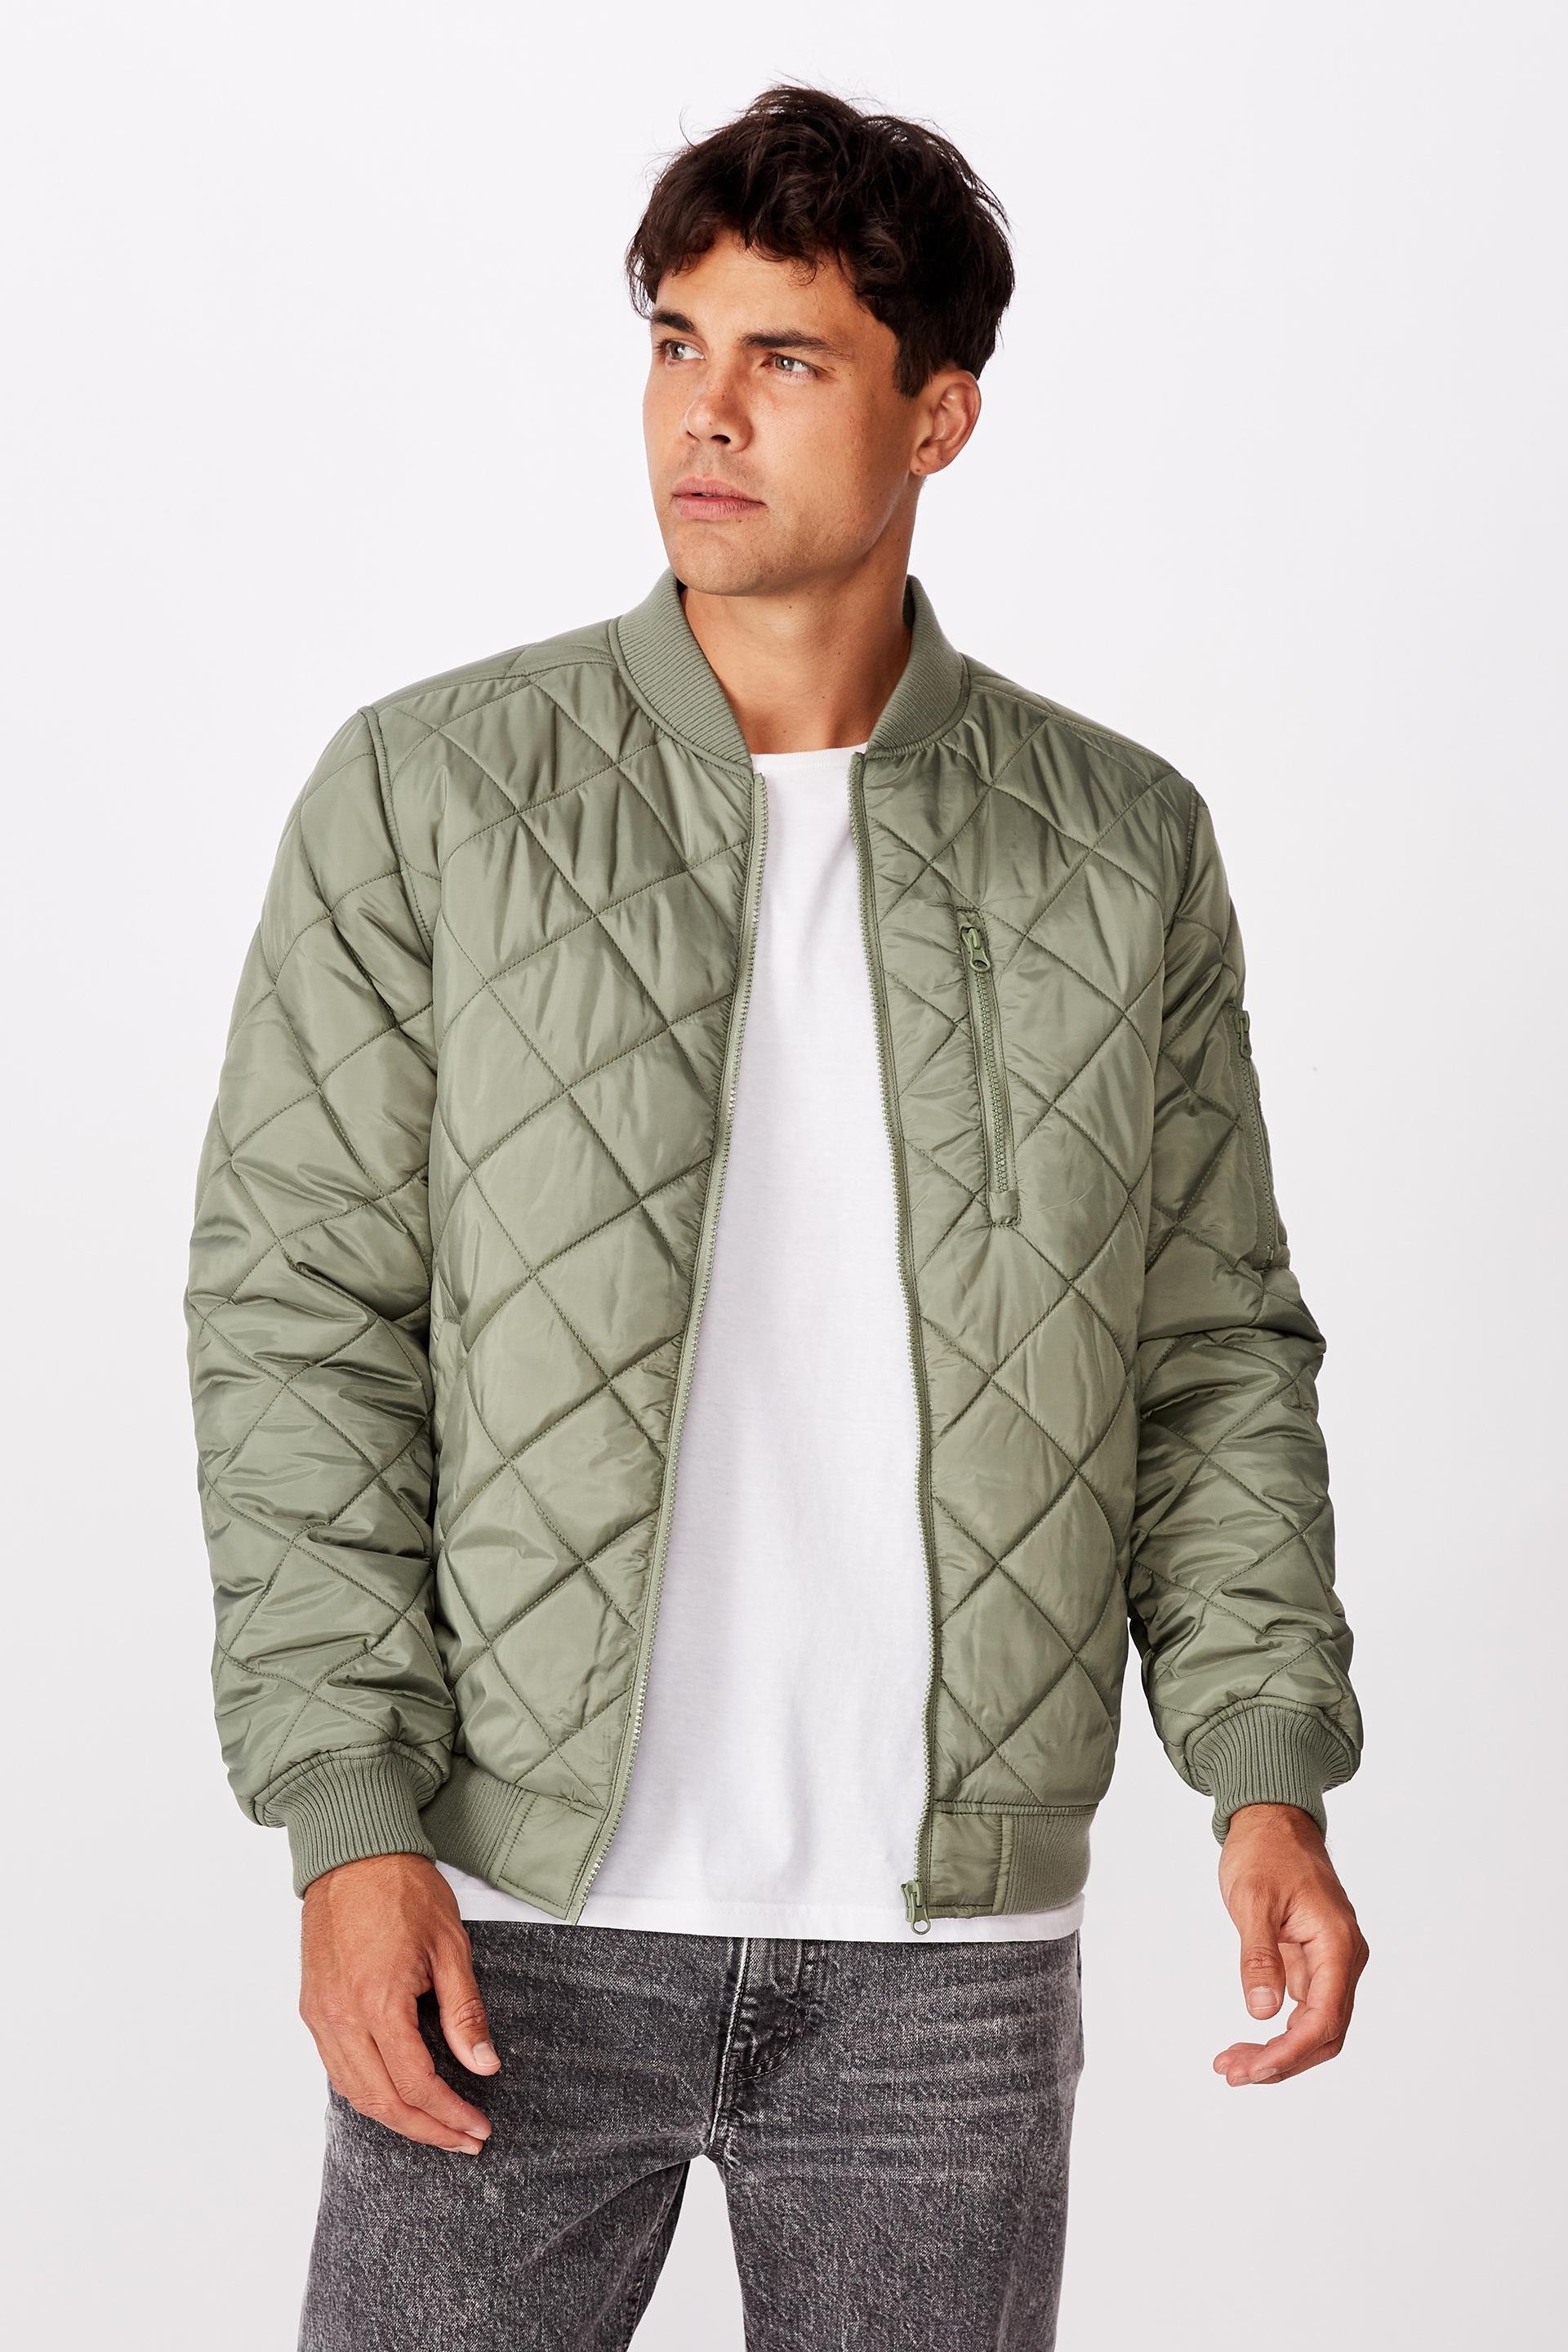 Quilted bomber jacket - khaki Cotton On Jackets | Superbalist.com